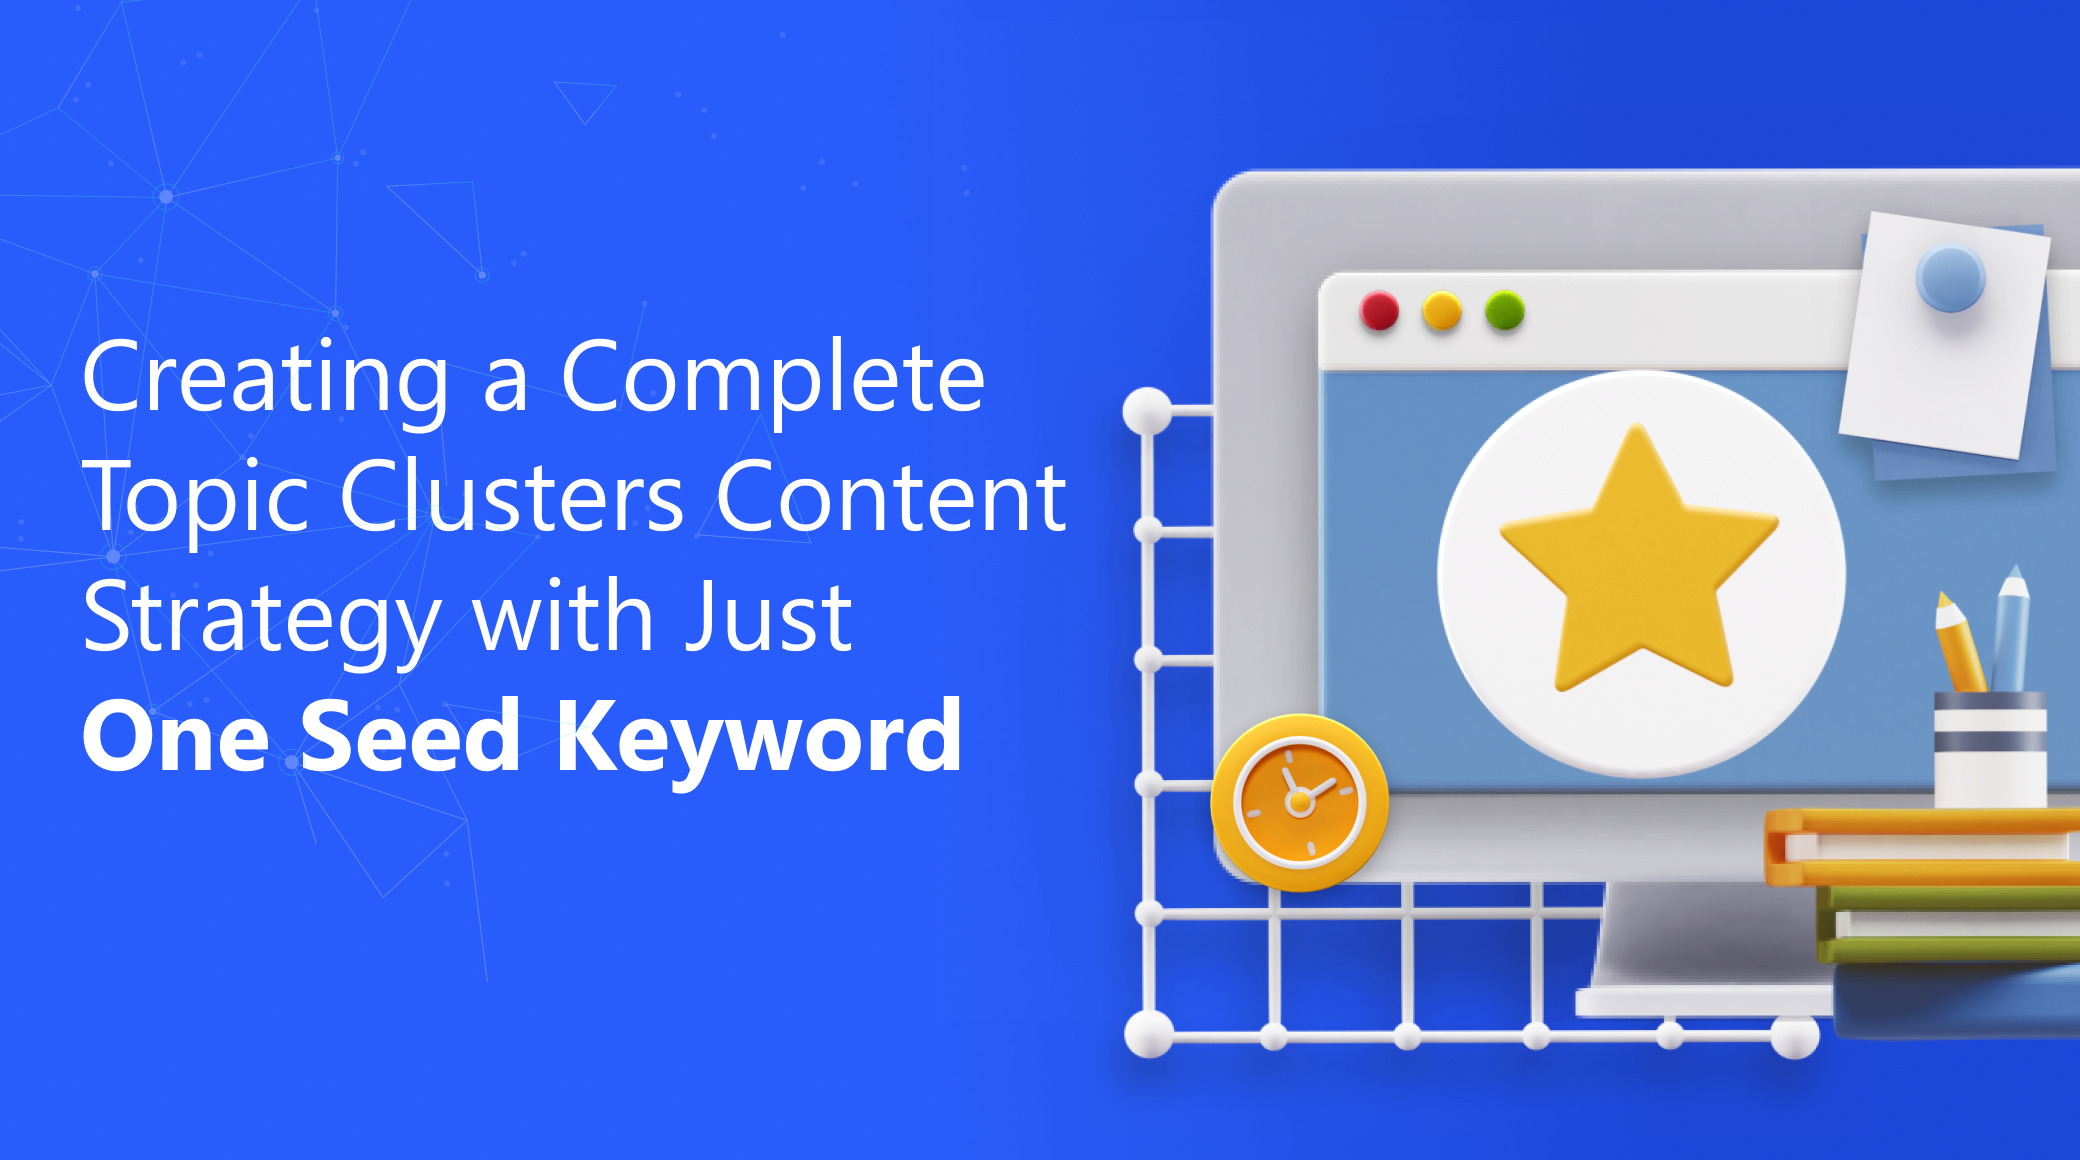 Creating a Complete Topic Clusters Content Strategy with Just One Seed Keyword